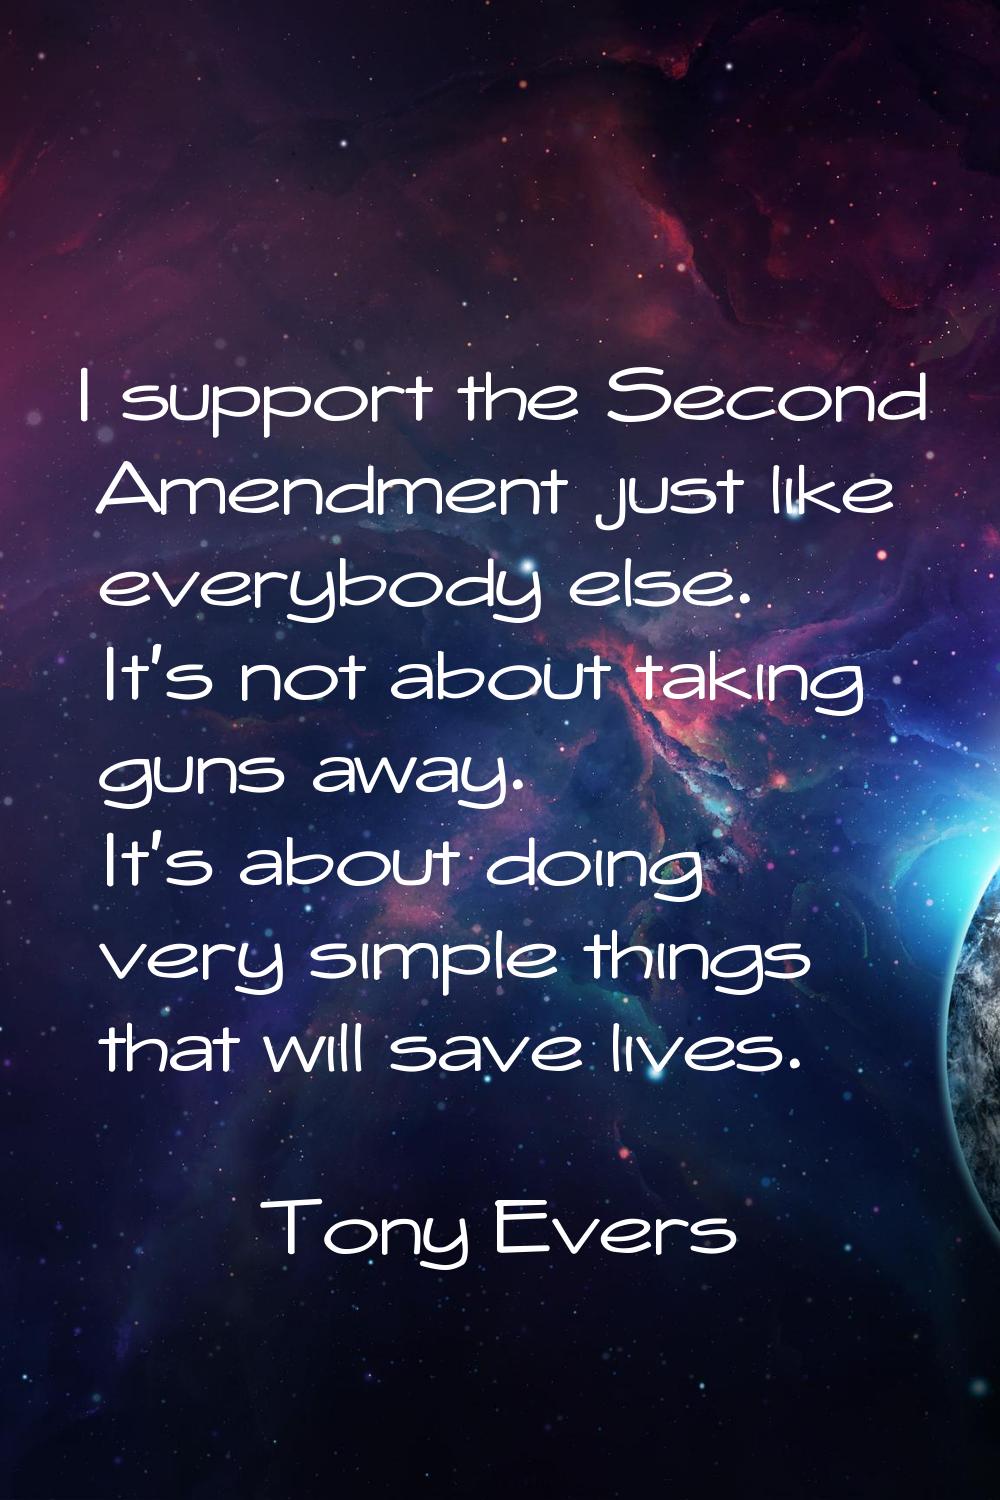 I support the Second Amendment just like everybody else. It's not about taking guns away. It's abou